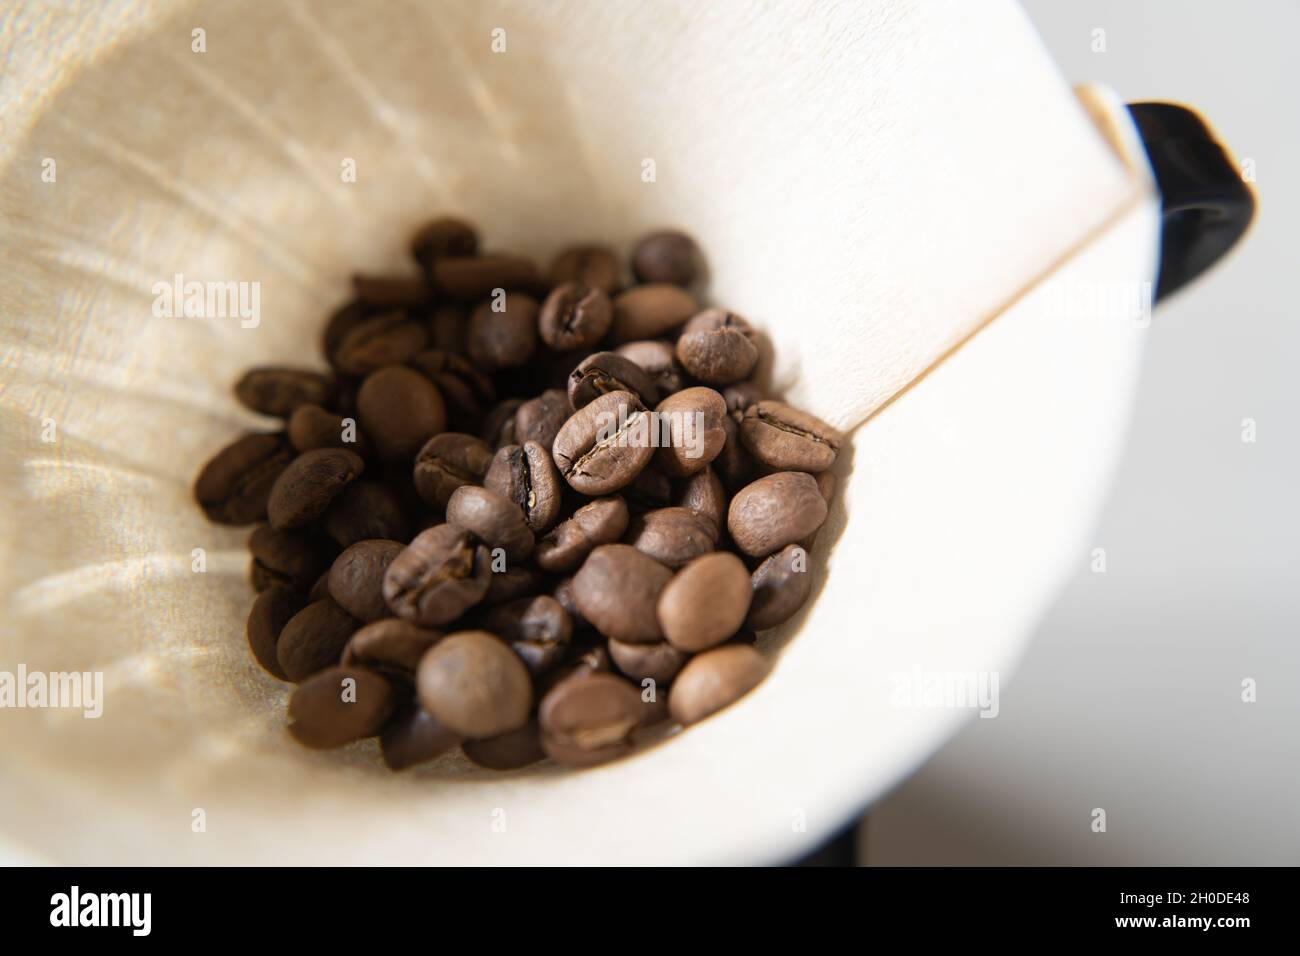 Roasted coffee beans in a coffee dripper Stock Photo